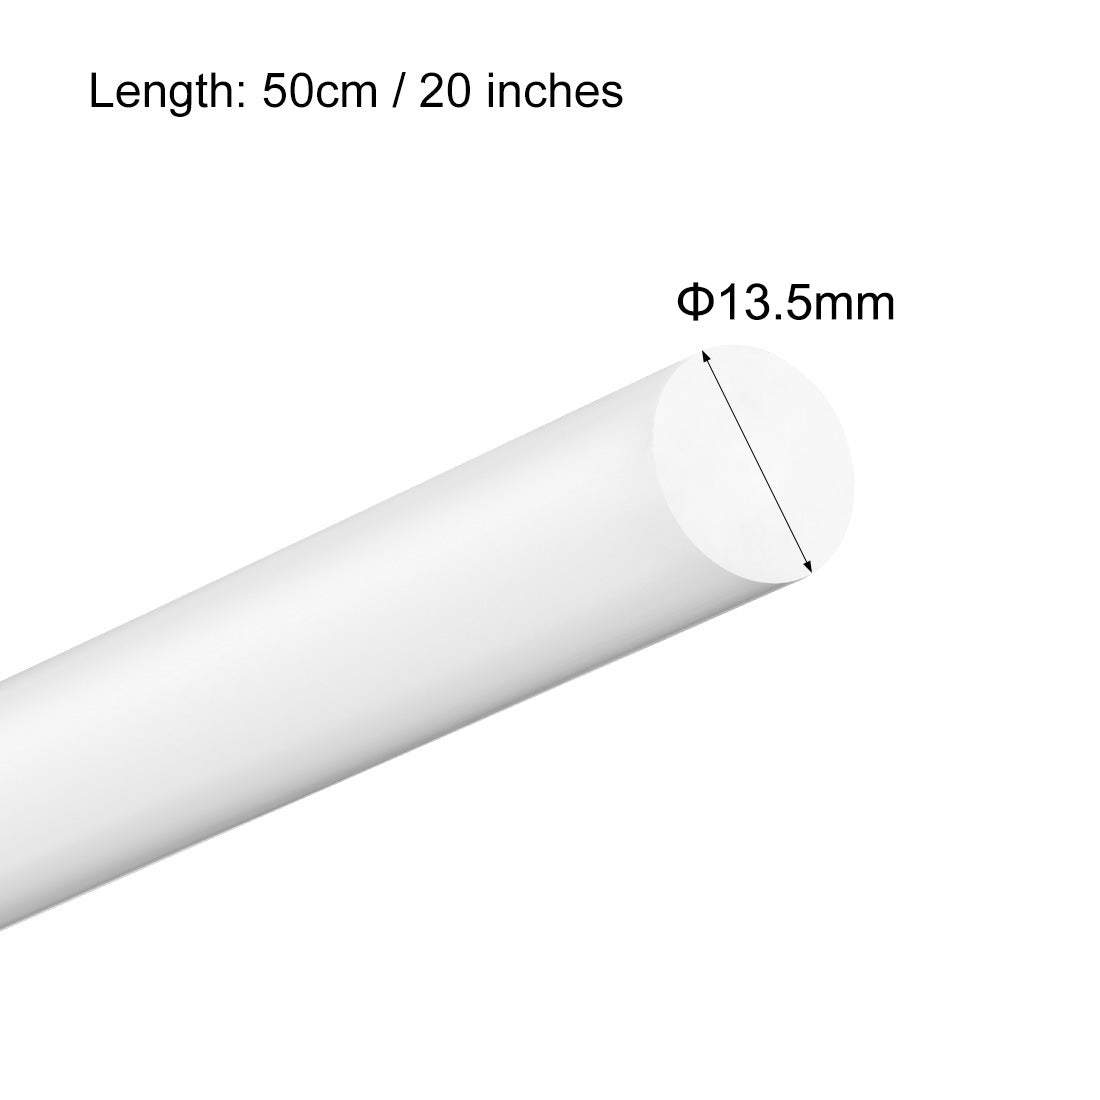 uxcell Uxcell Plastic Round Rod,12.5mm Dia 50cm White Engineering Plastic Round Bar 3pcs